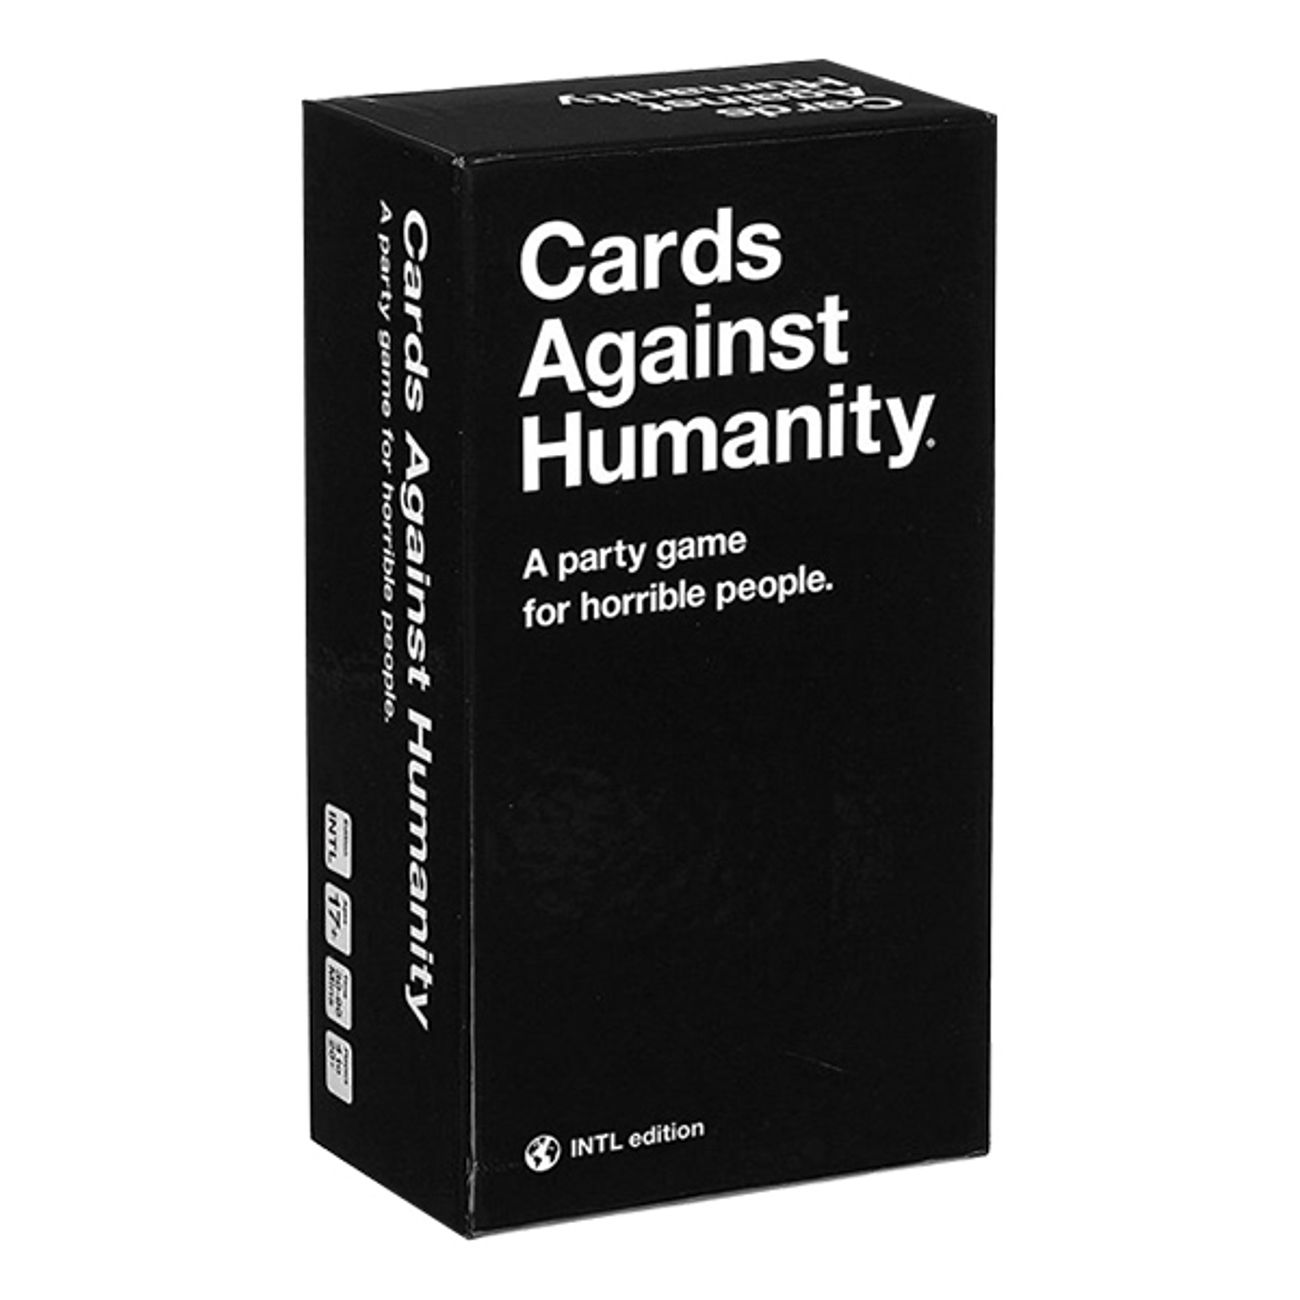 NEW Cards Against Humanity Expansion Packs 1-6 